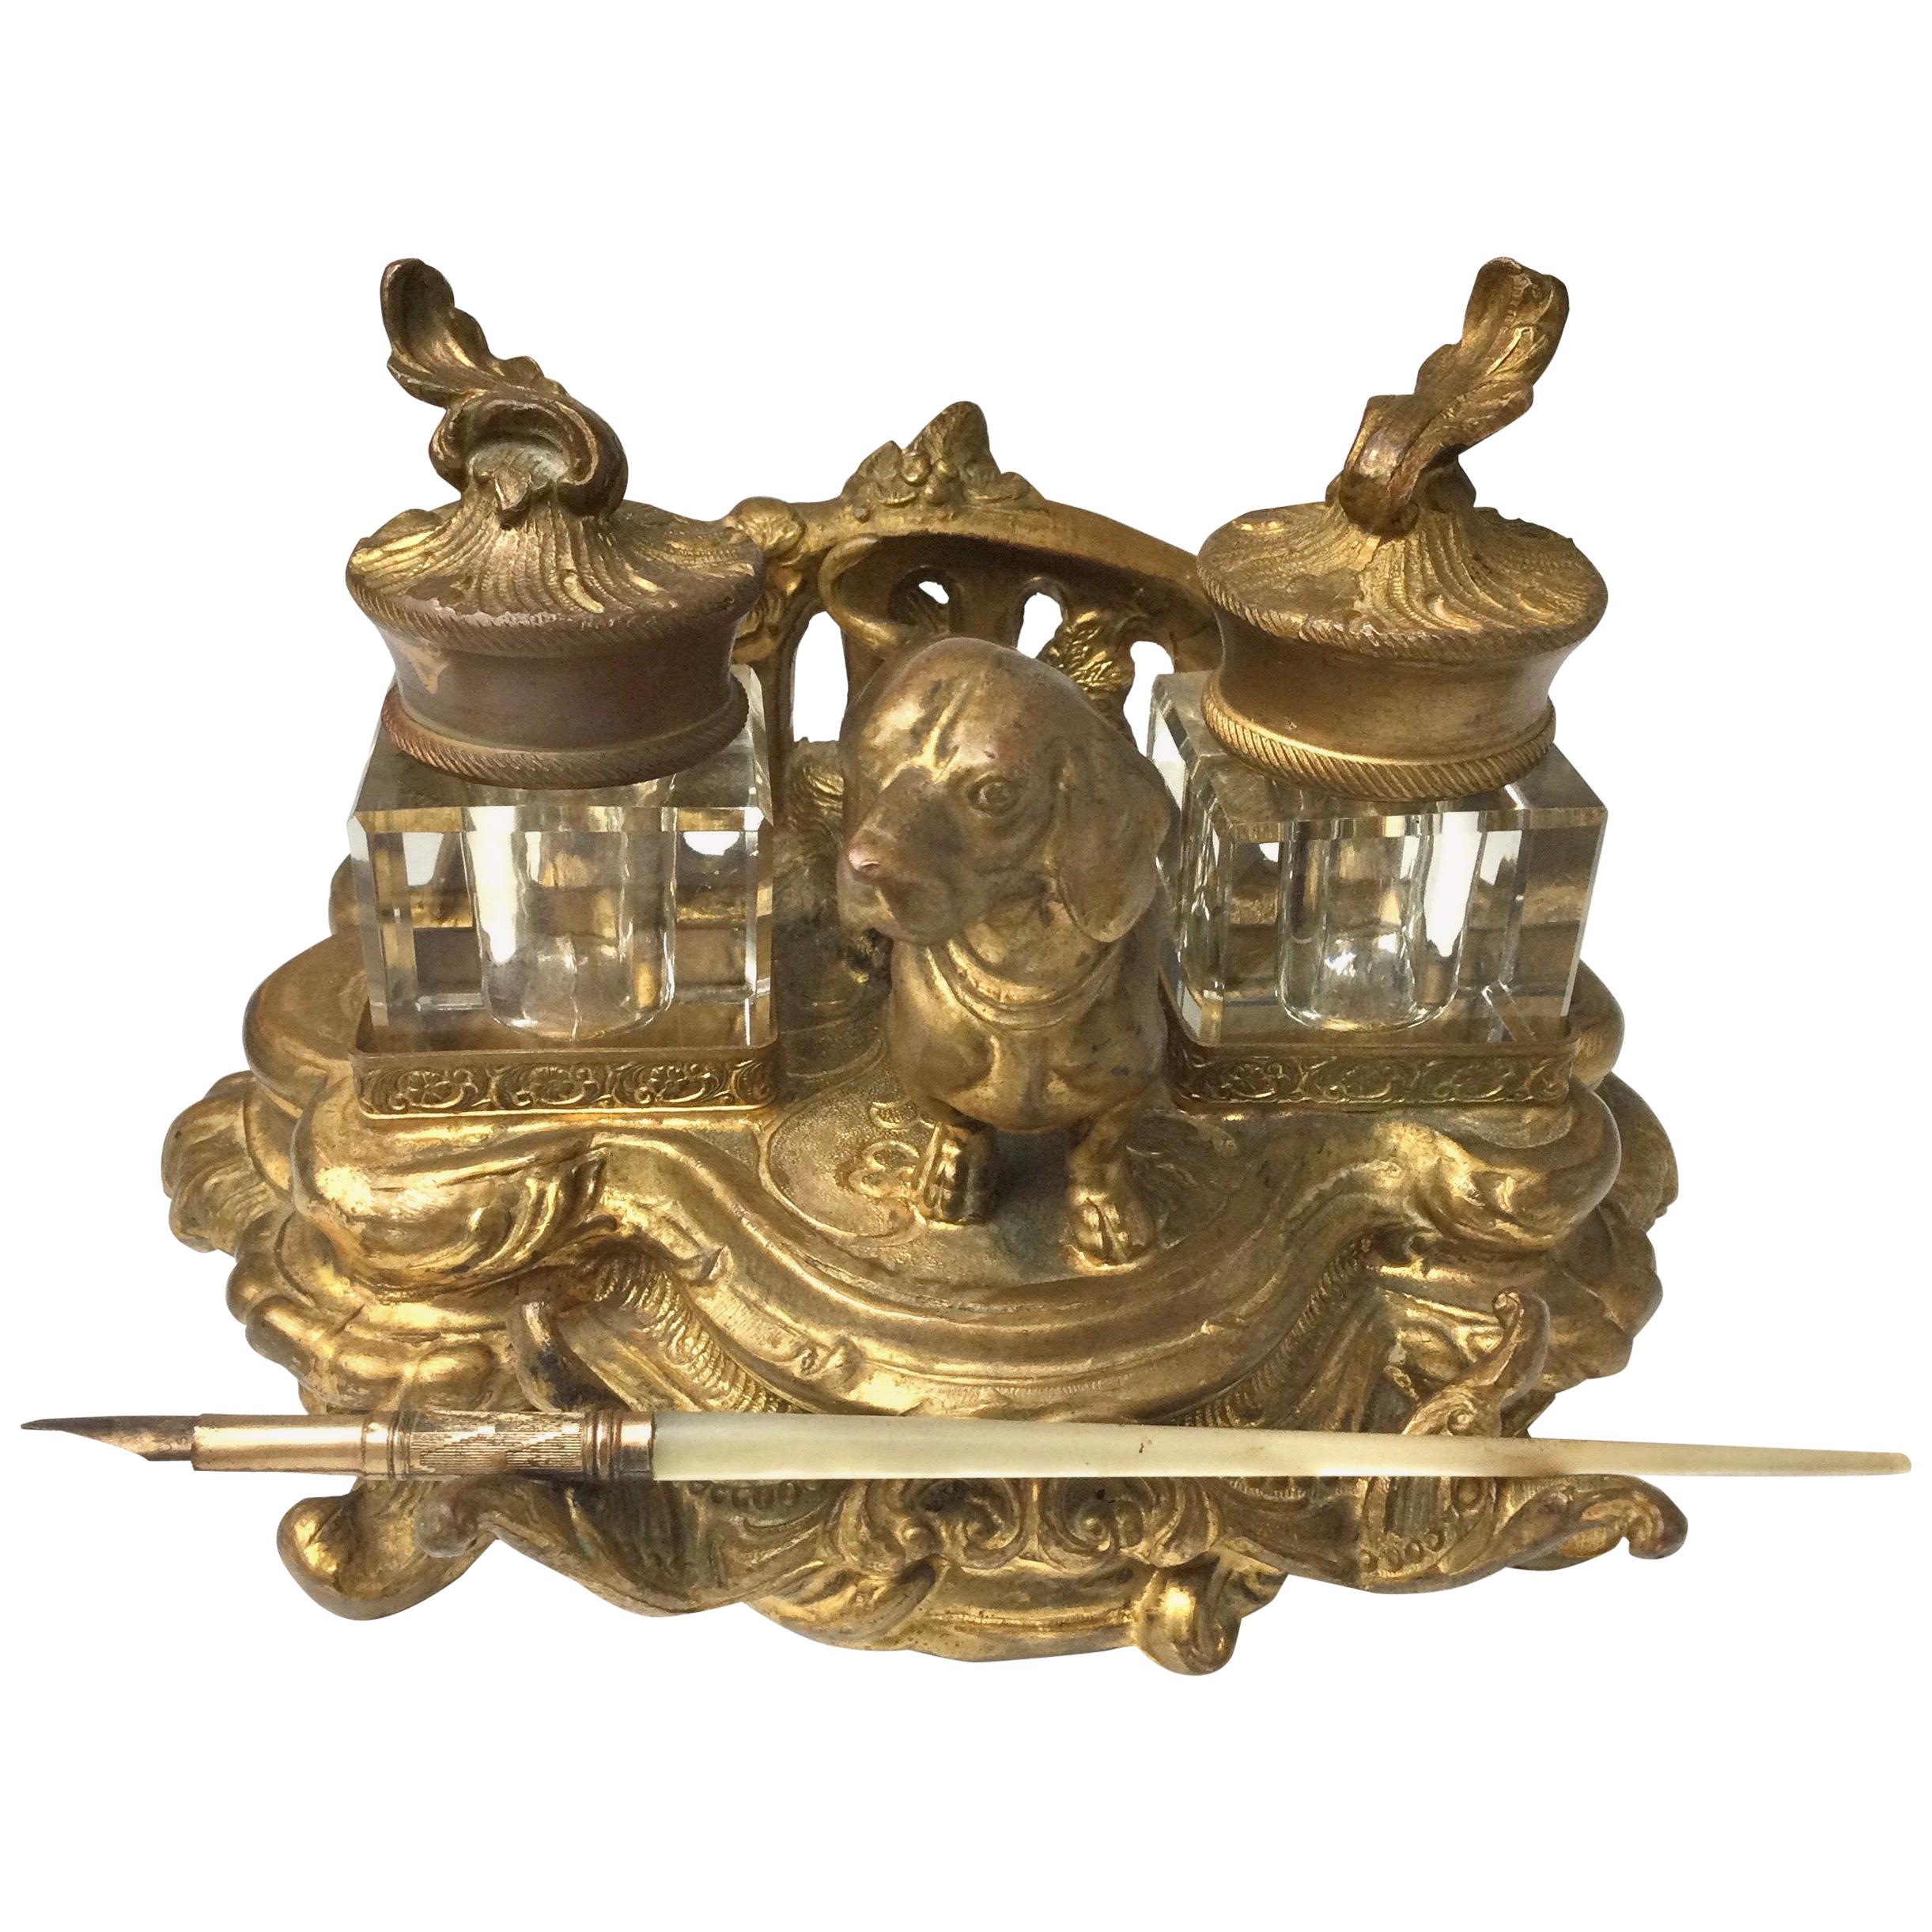 Antique Gilt Metal Double Glass Inkwells with Dachshund Dog